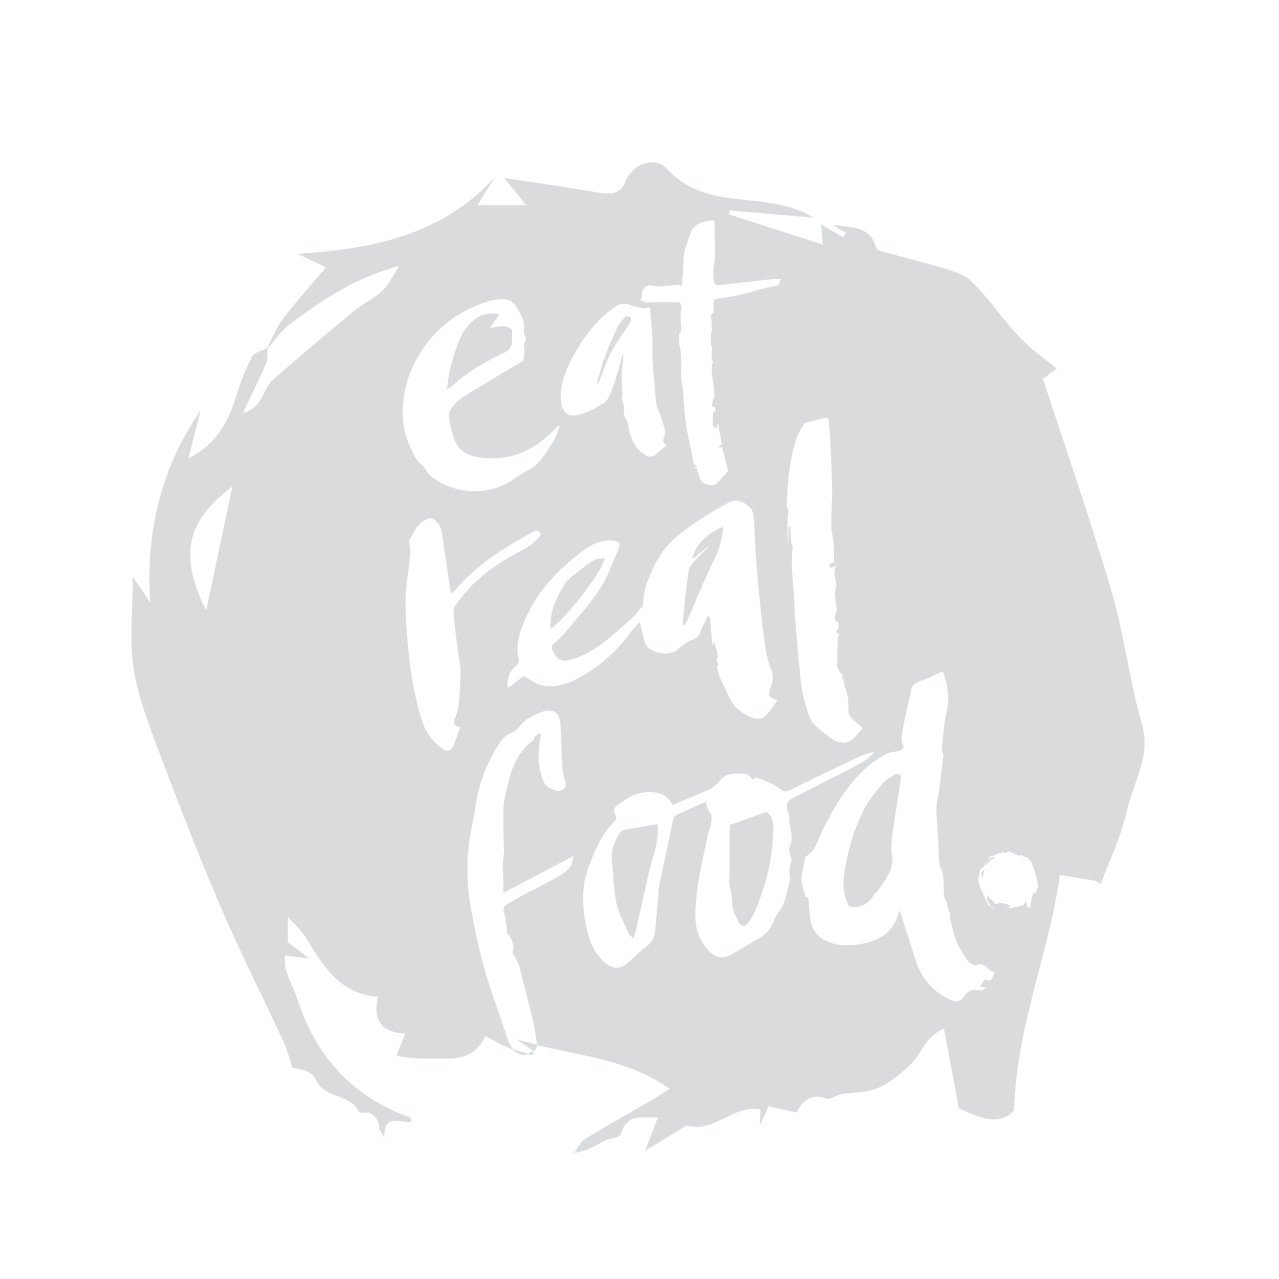 Food doesn't need to be complicated, it just needs to be real. Join us at http://t.co/HcwITvizal